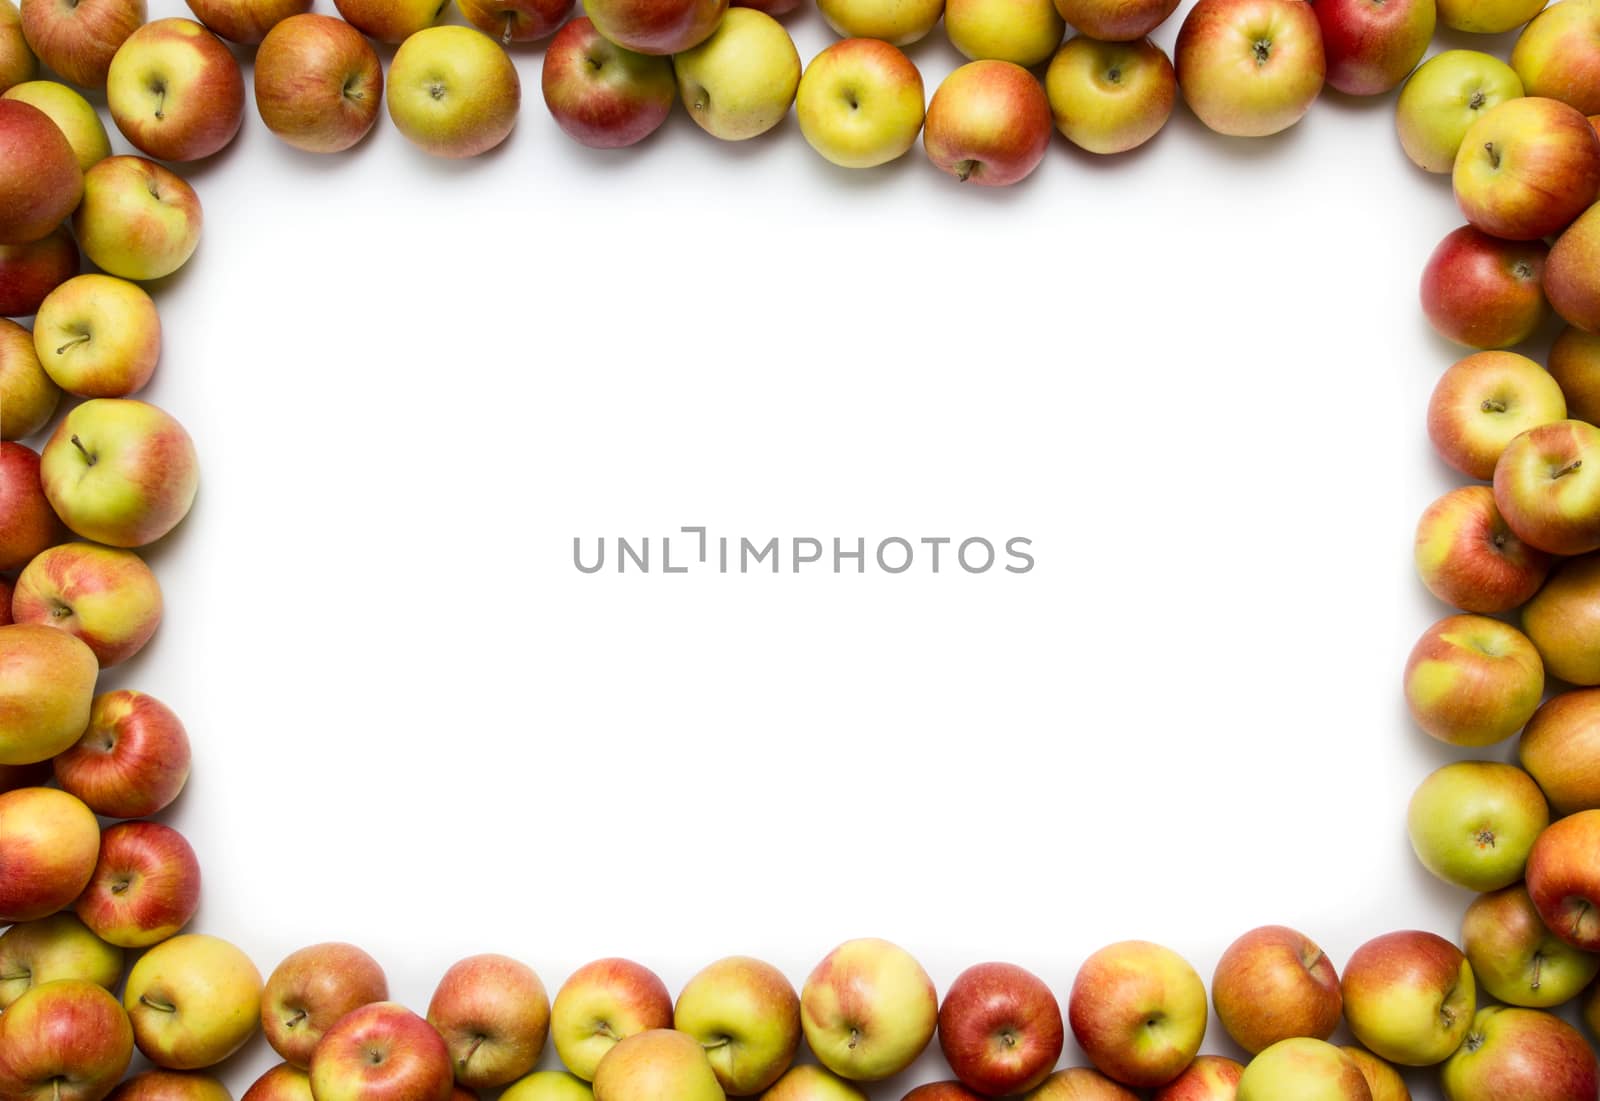 Fresh whole apples background with copy space